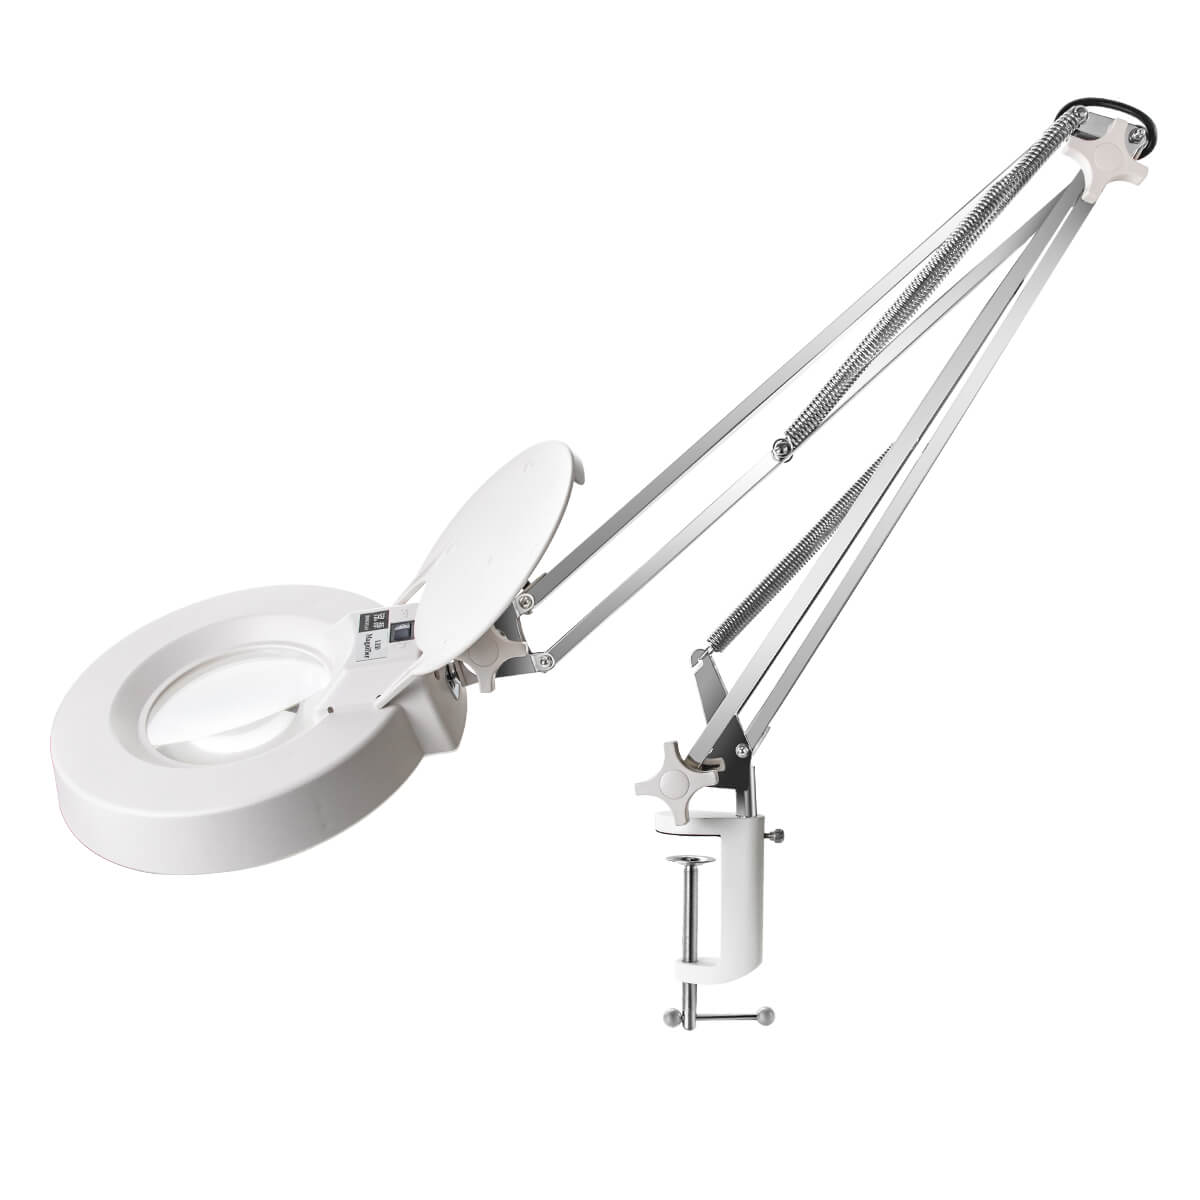 Gynnx 10X Magnifying Lamp with Clamp G1